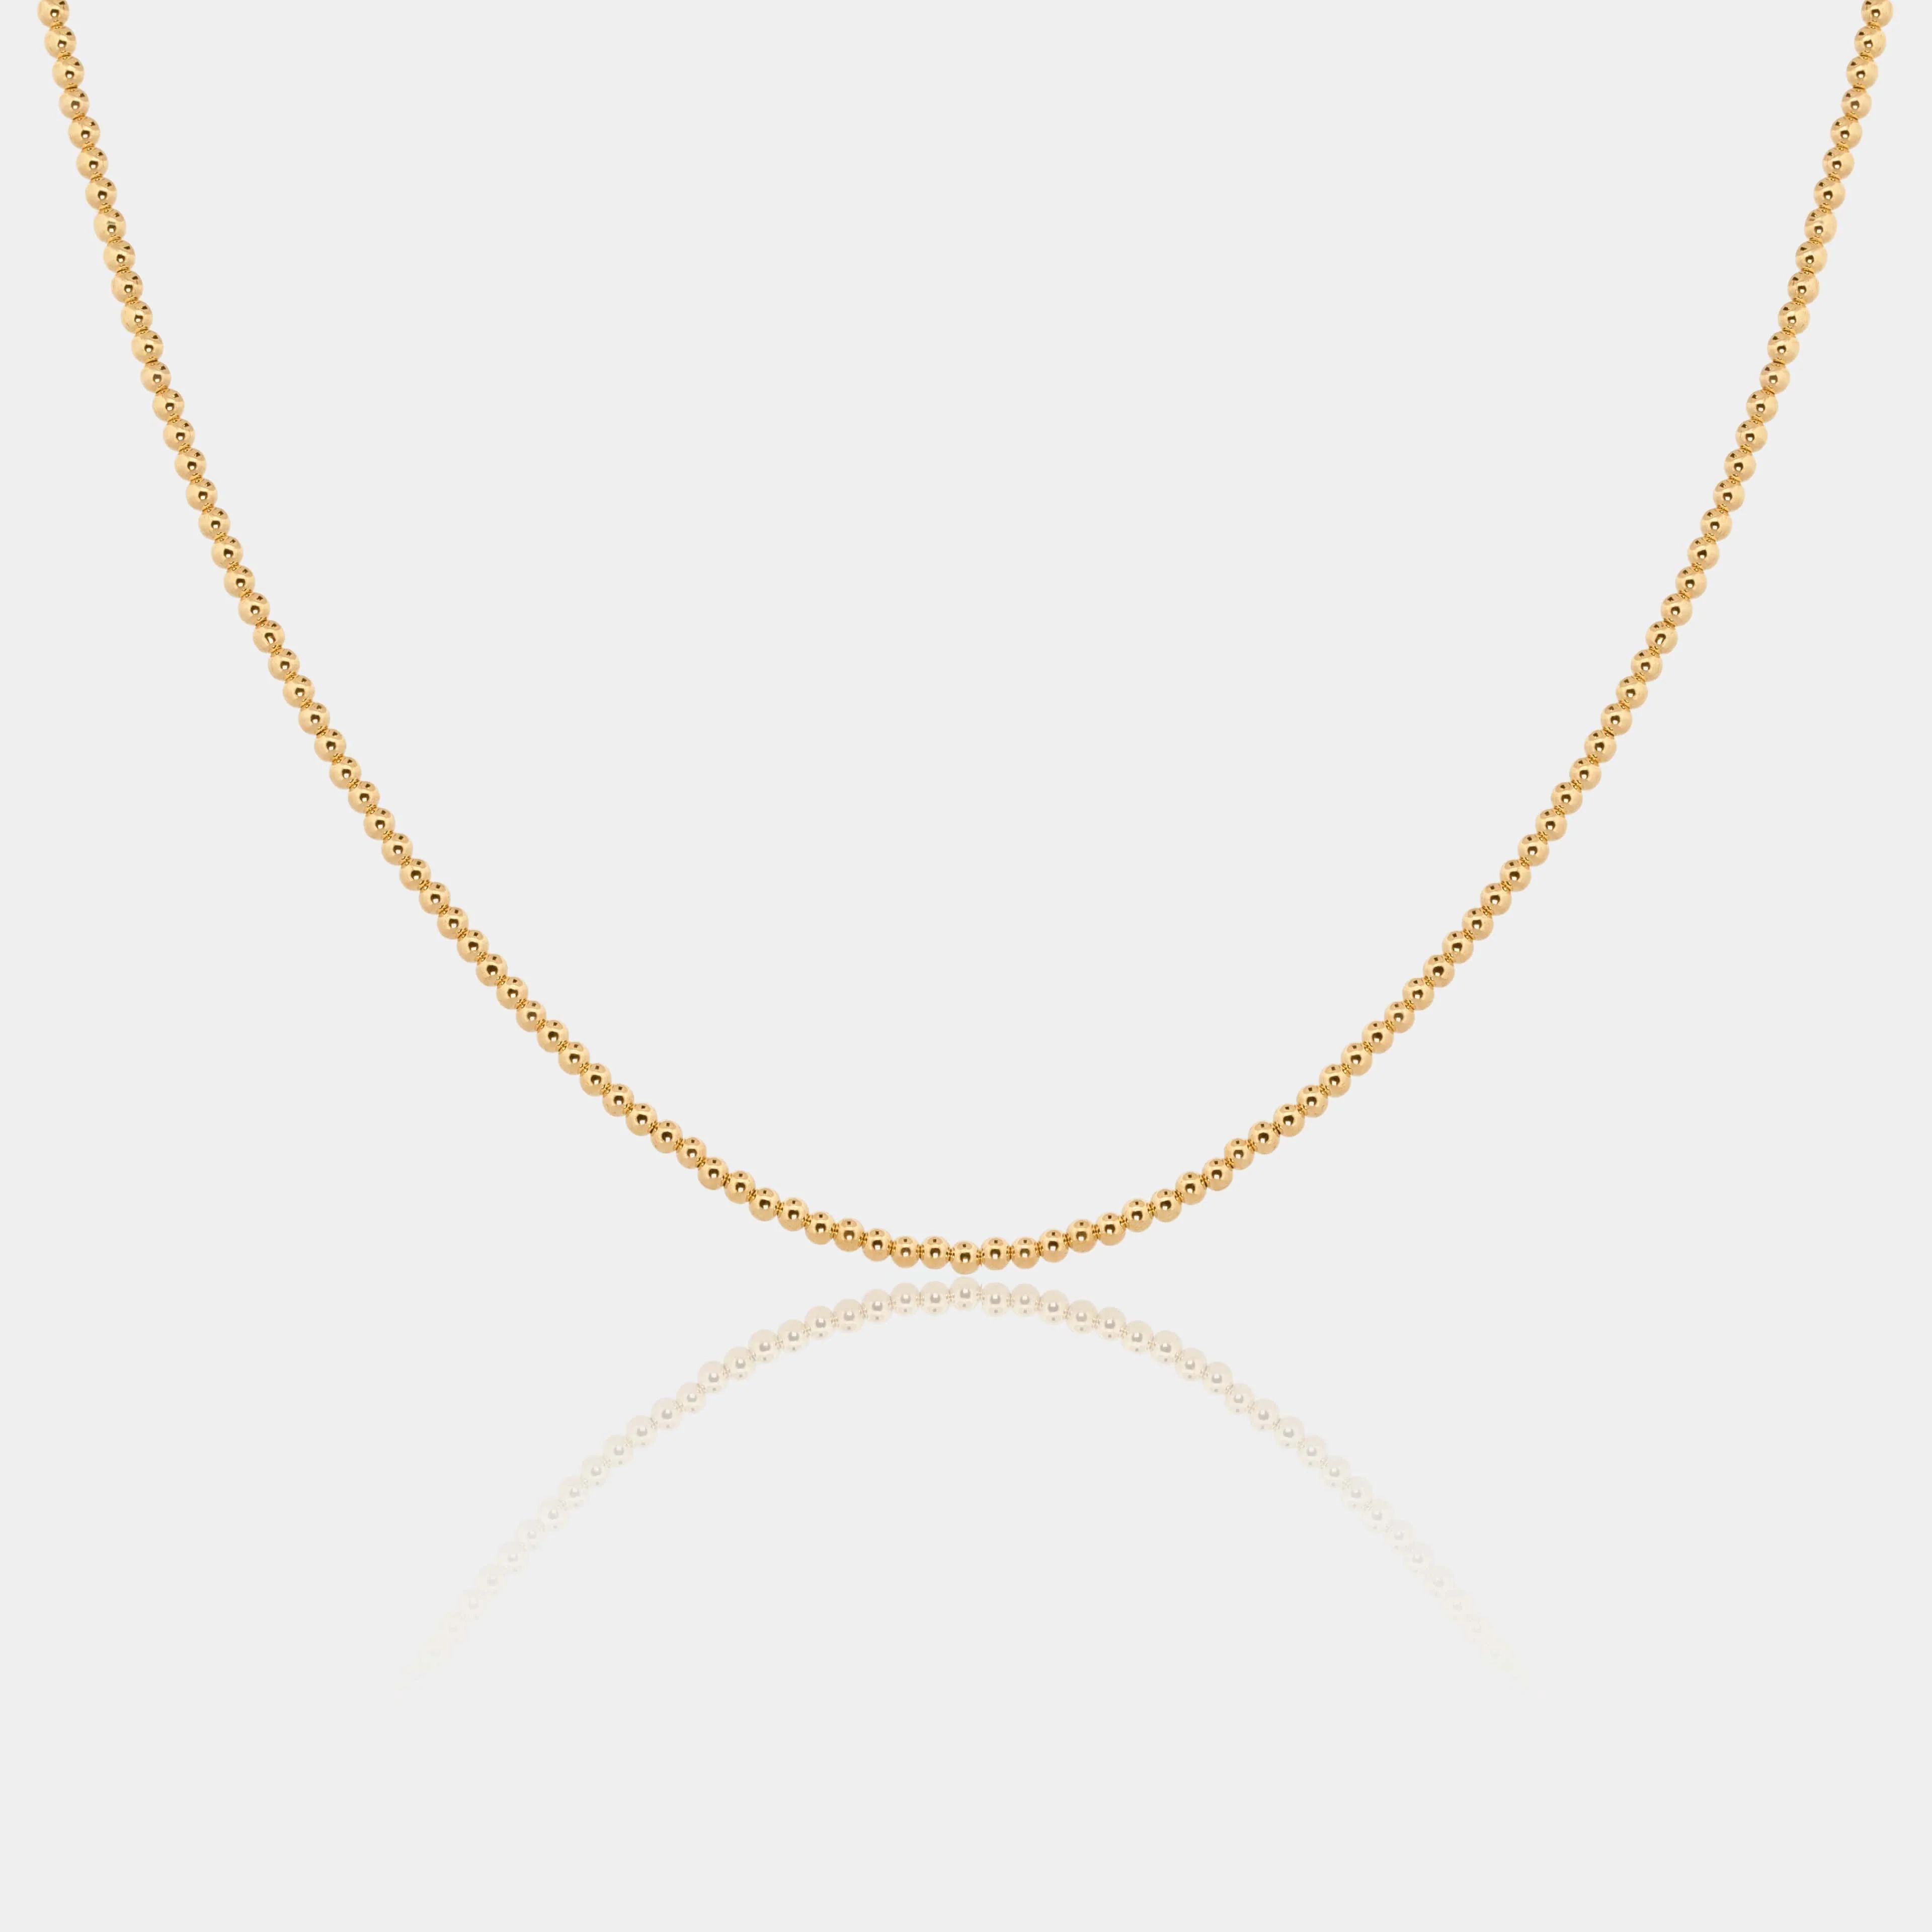 Small Gold Beaded Necklace | LINK'D THE LABEL